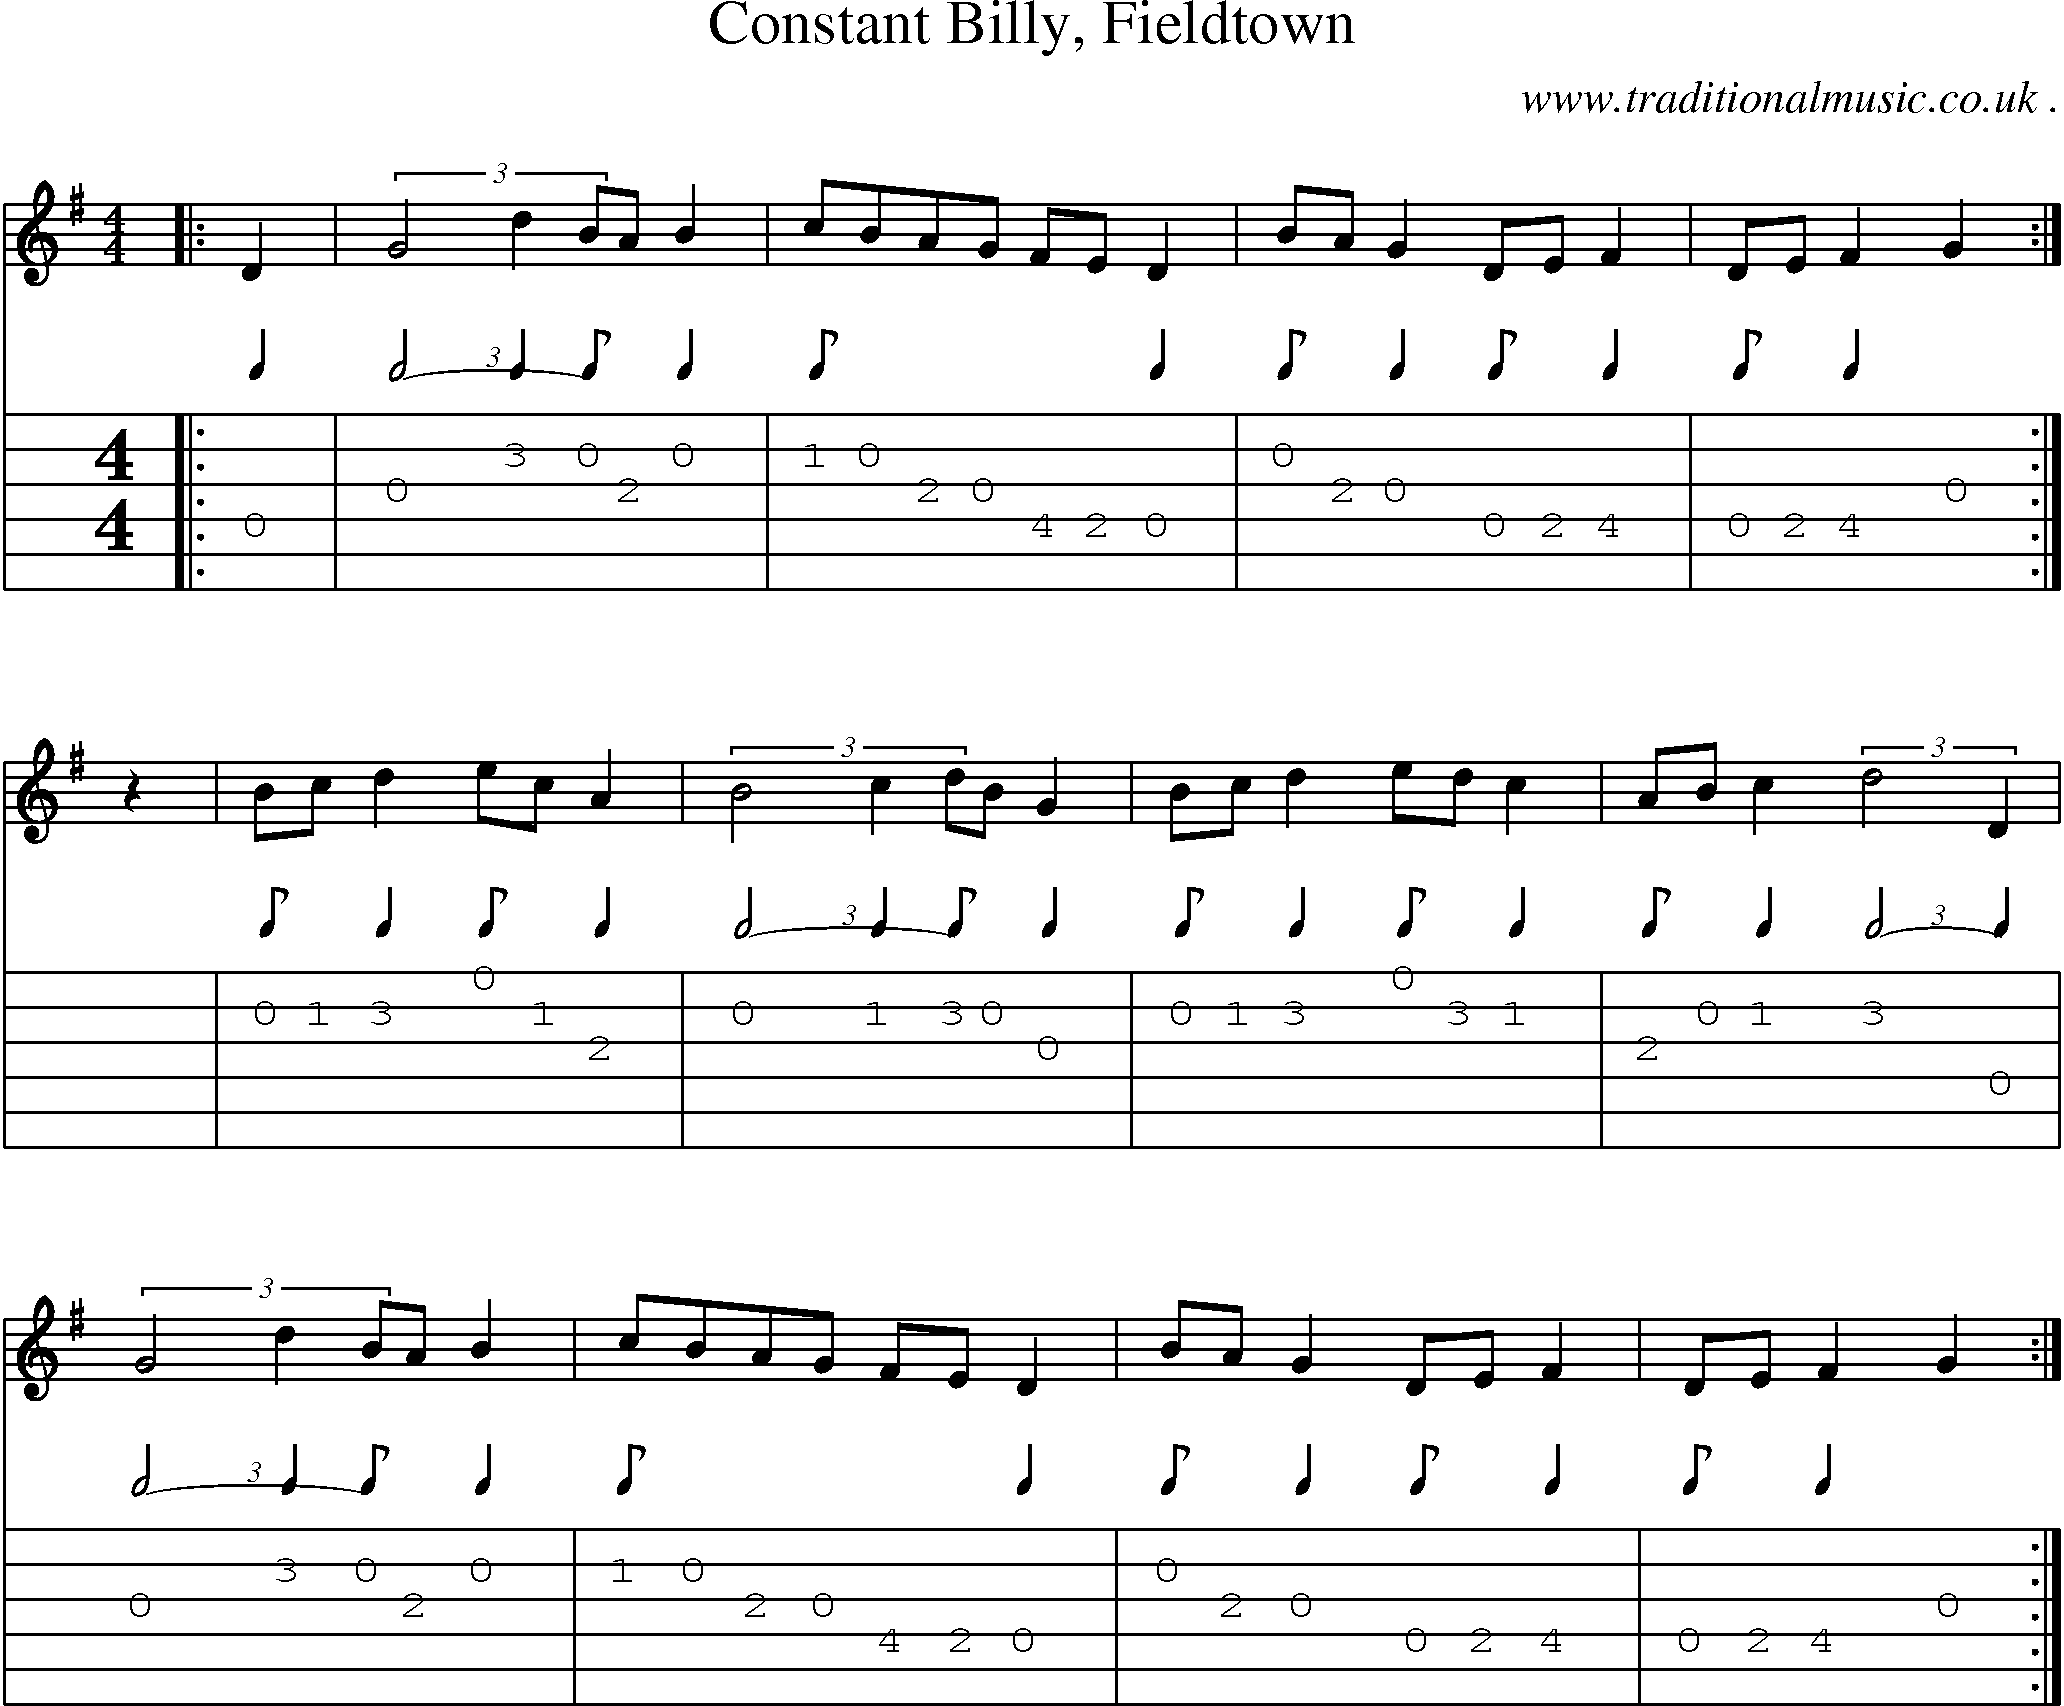 Sheet-Music and Guitar Tabs for Constant Billy Fieldtown